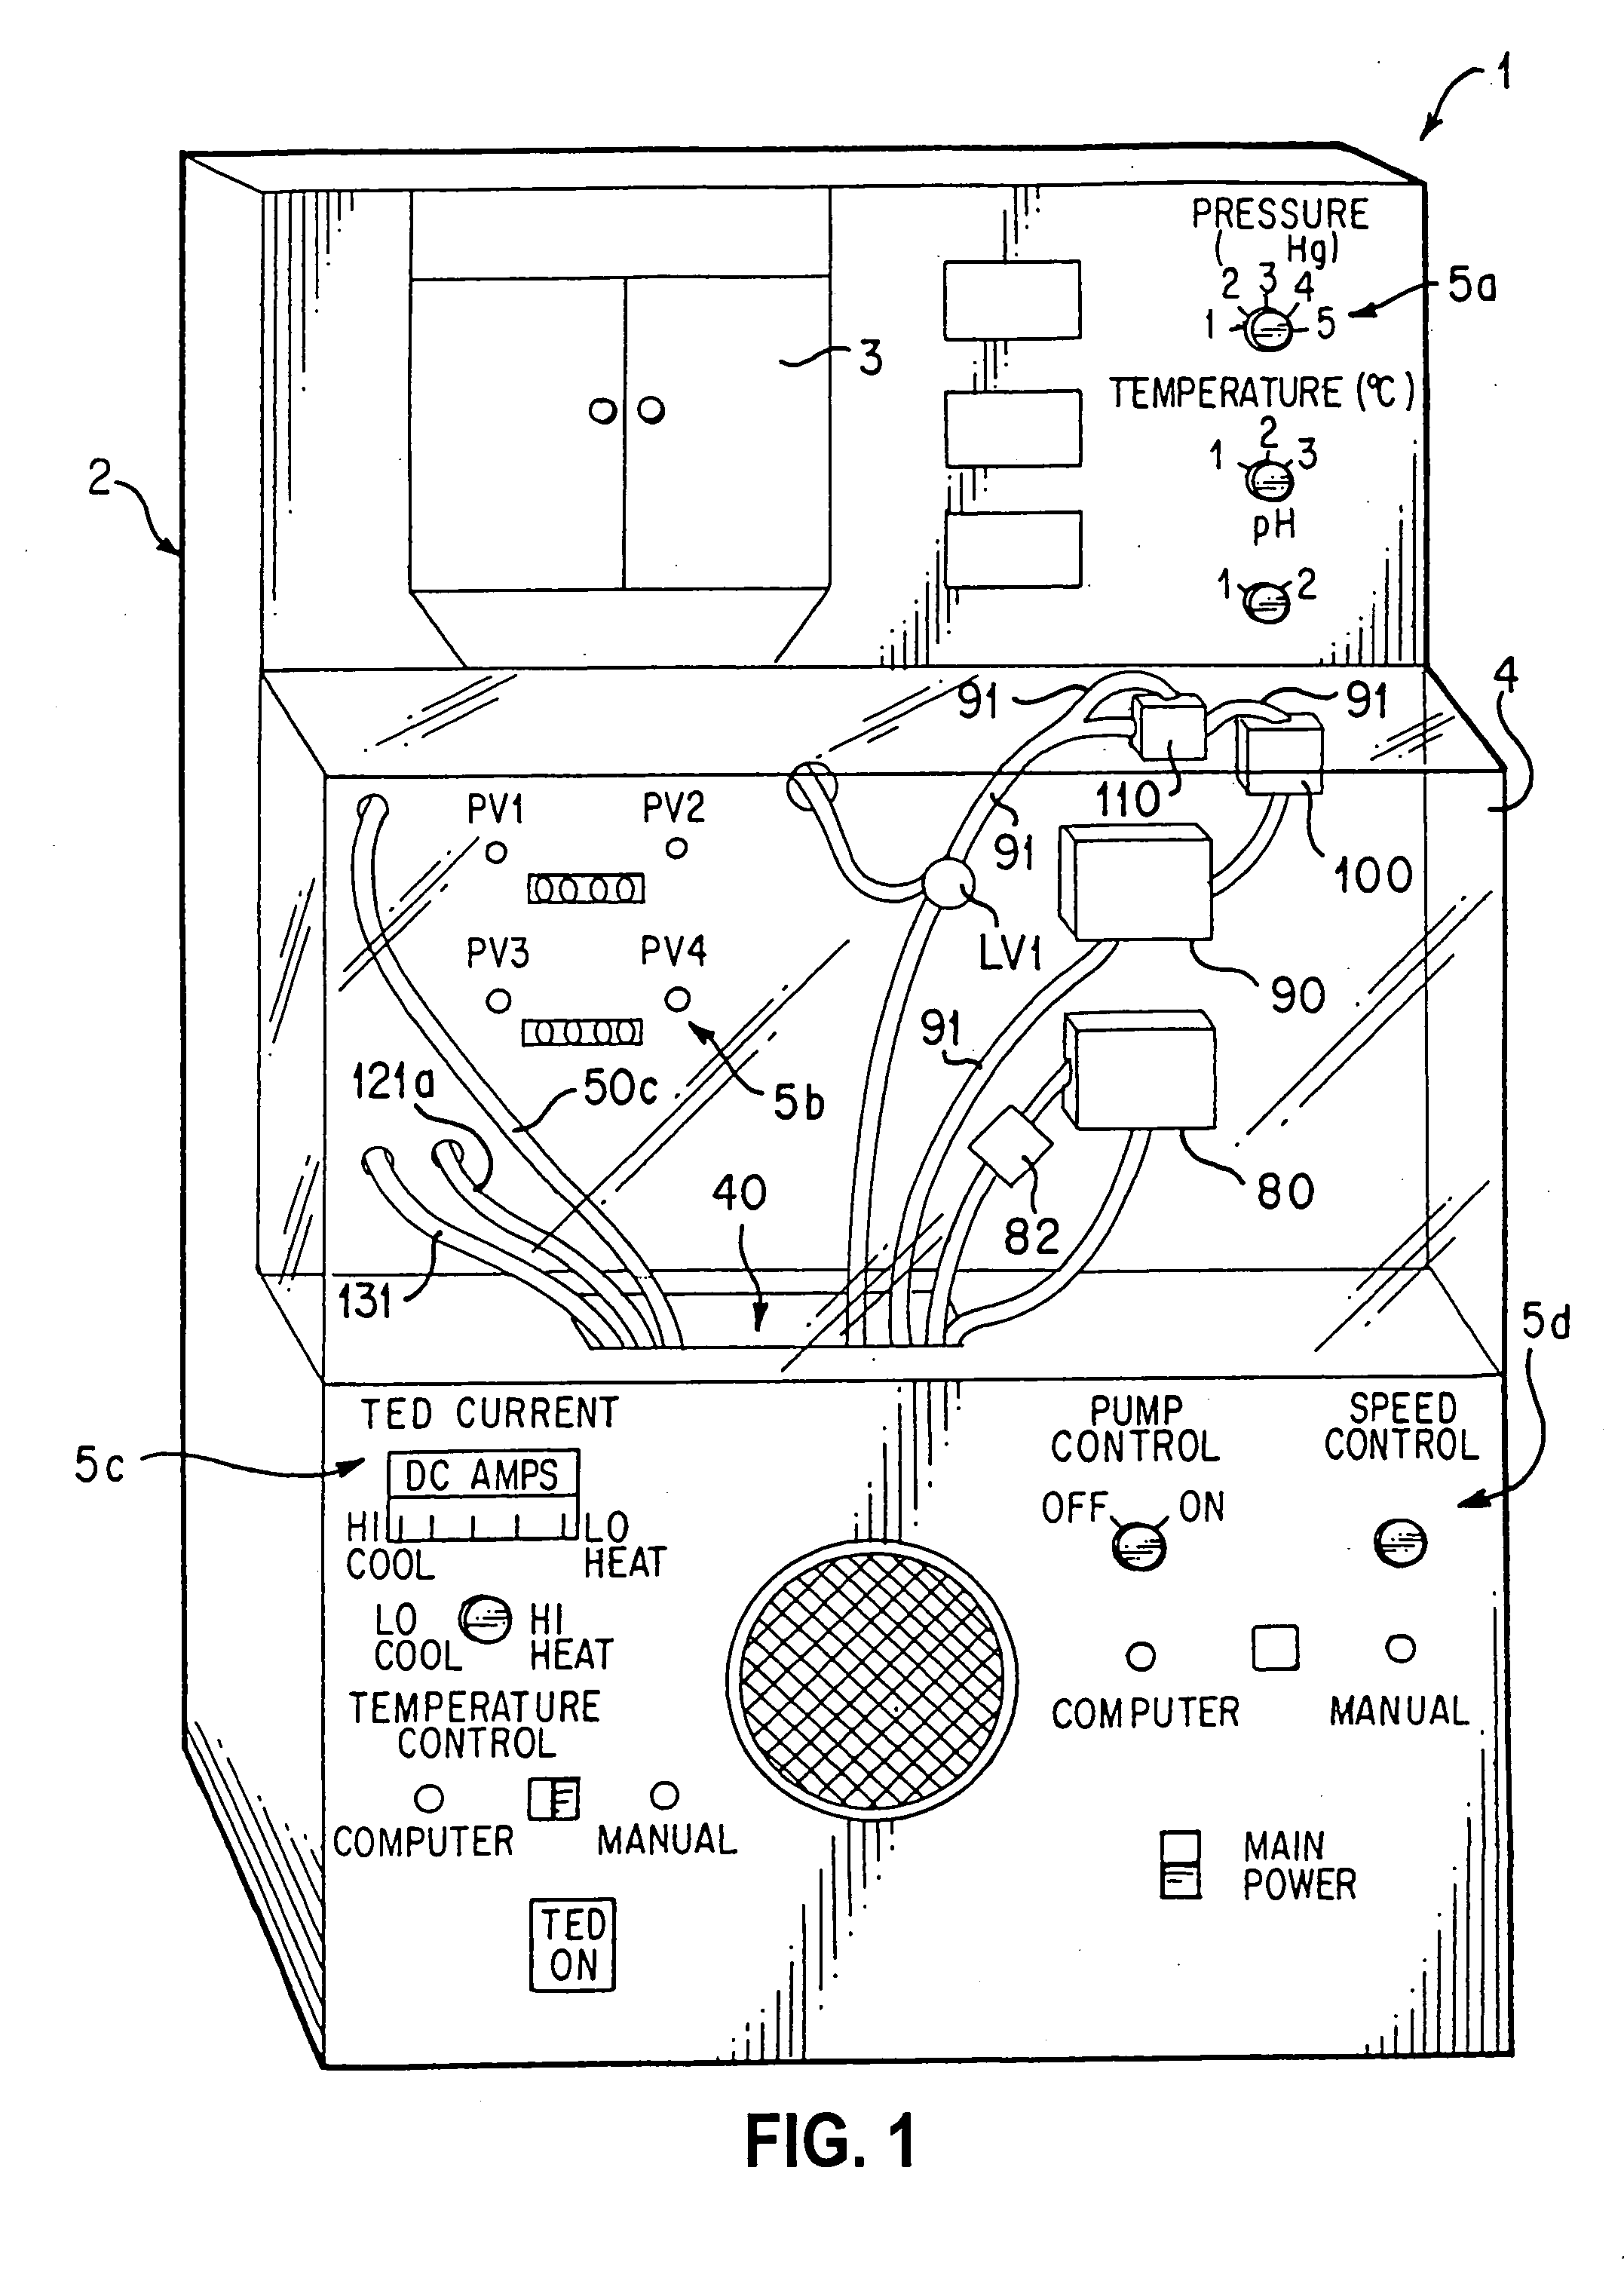 Apparatus and method for perfusion and determining the viability of an organ